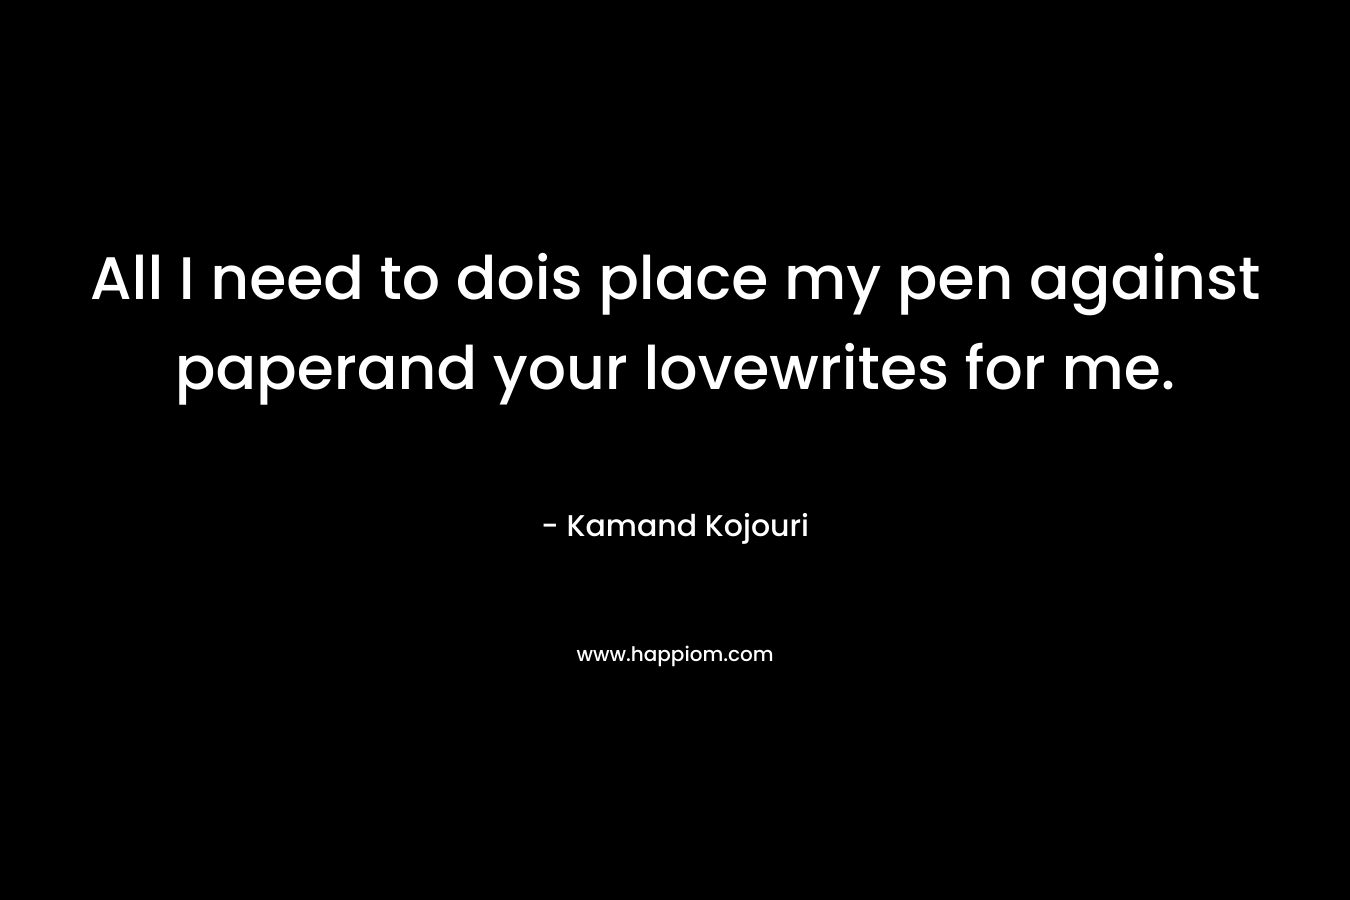 All I need to dois place my pen against paperand your lovewrites for me. – Kamand Kojouri